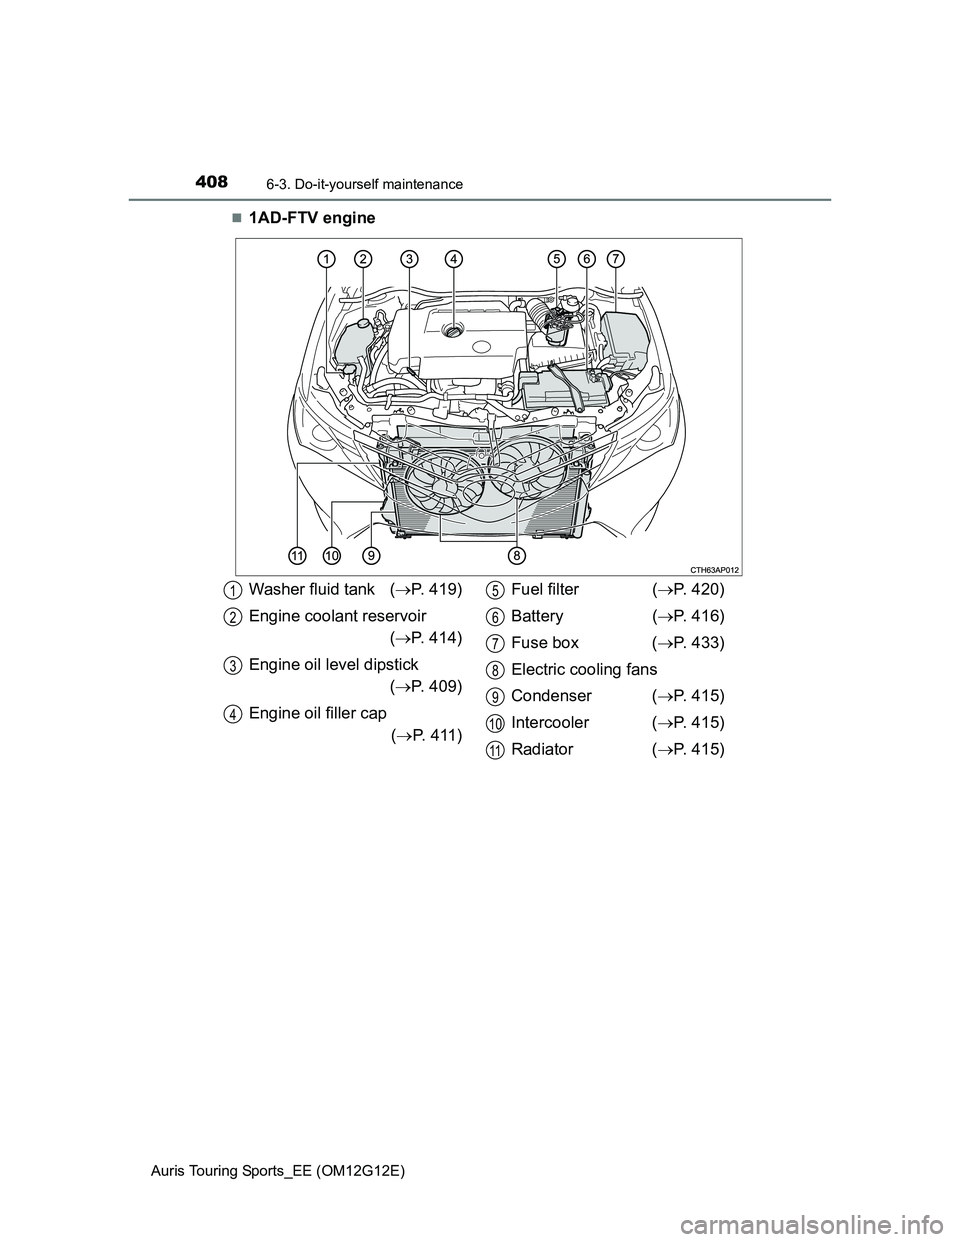 TOYOTA AURIS TOURING SPORTS 2013  Owners Manual 4086-3. Do-it-yourself maintenance
Auris Touring Sports_EE (OM12G12E)
1AD-FTV engine
Washer fluid tank (P. 419)
Engine coolant reservoir
(P. 414)
Engine oil level dipstick
(P. 409)
Engine 